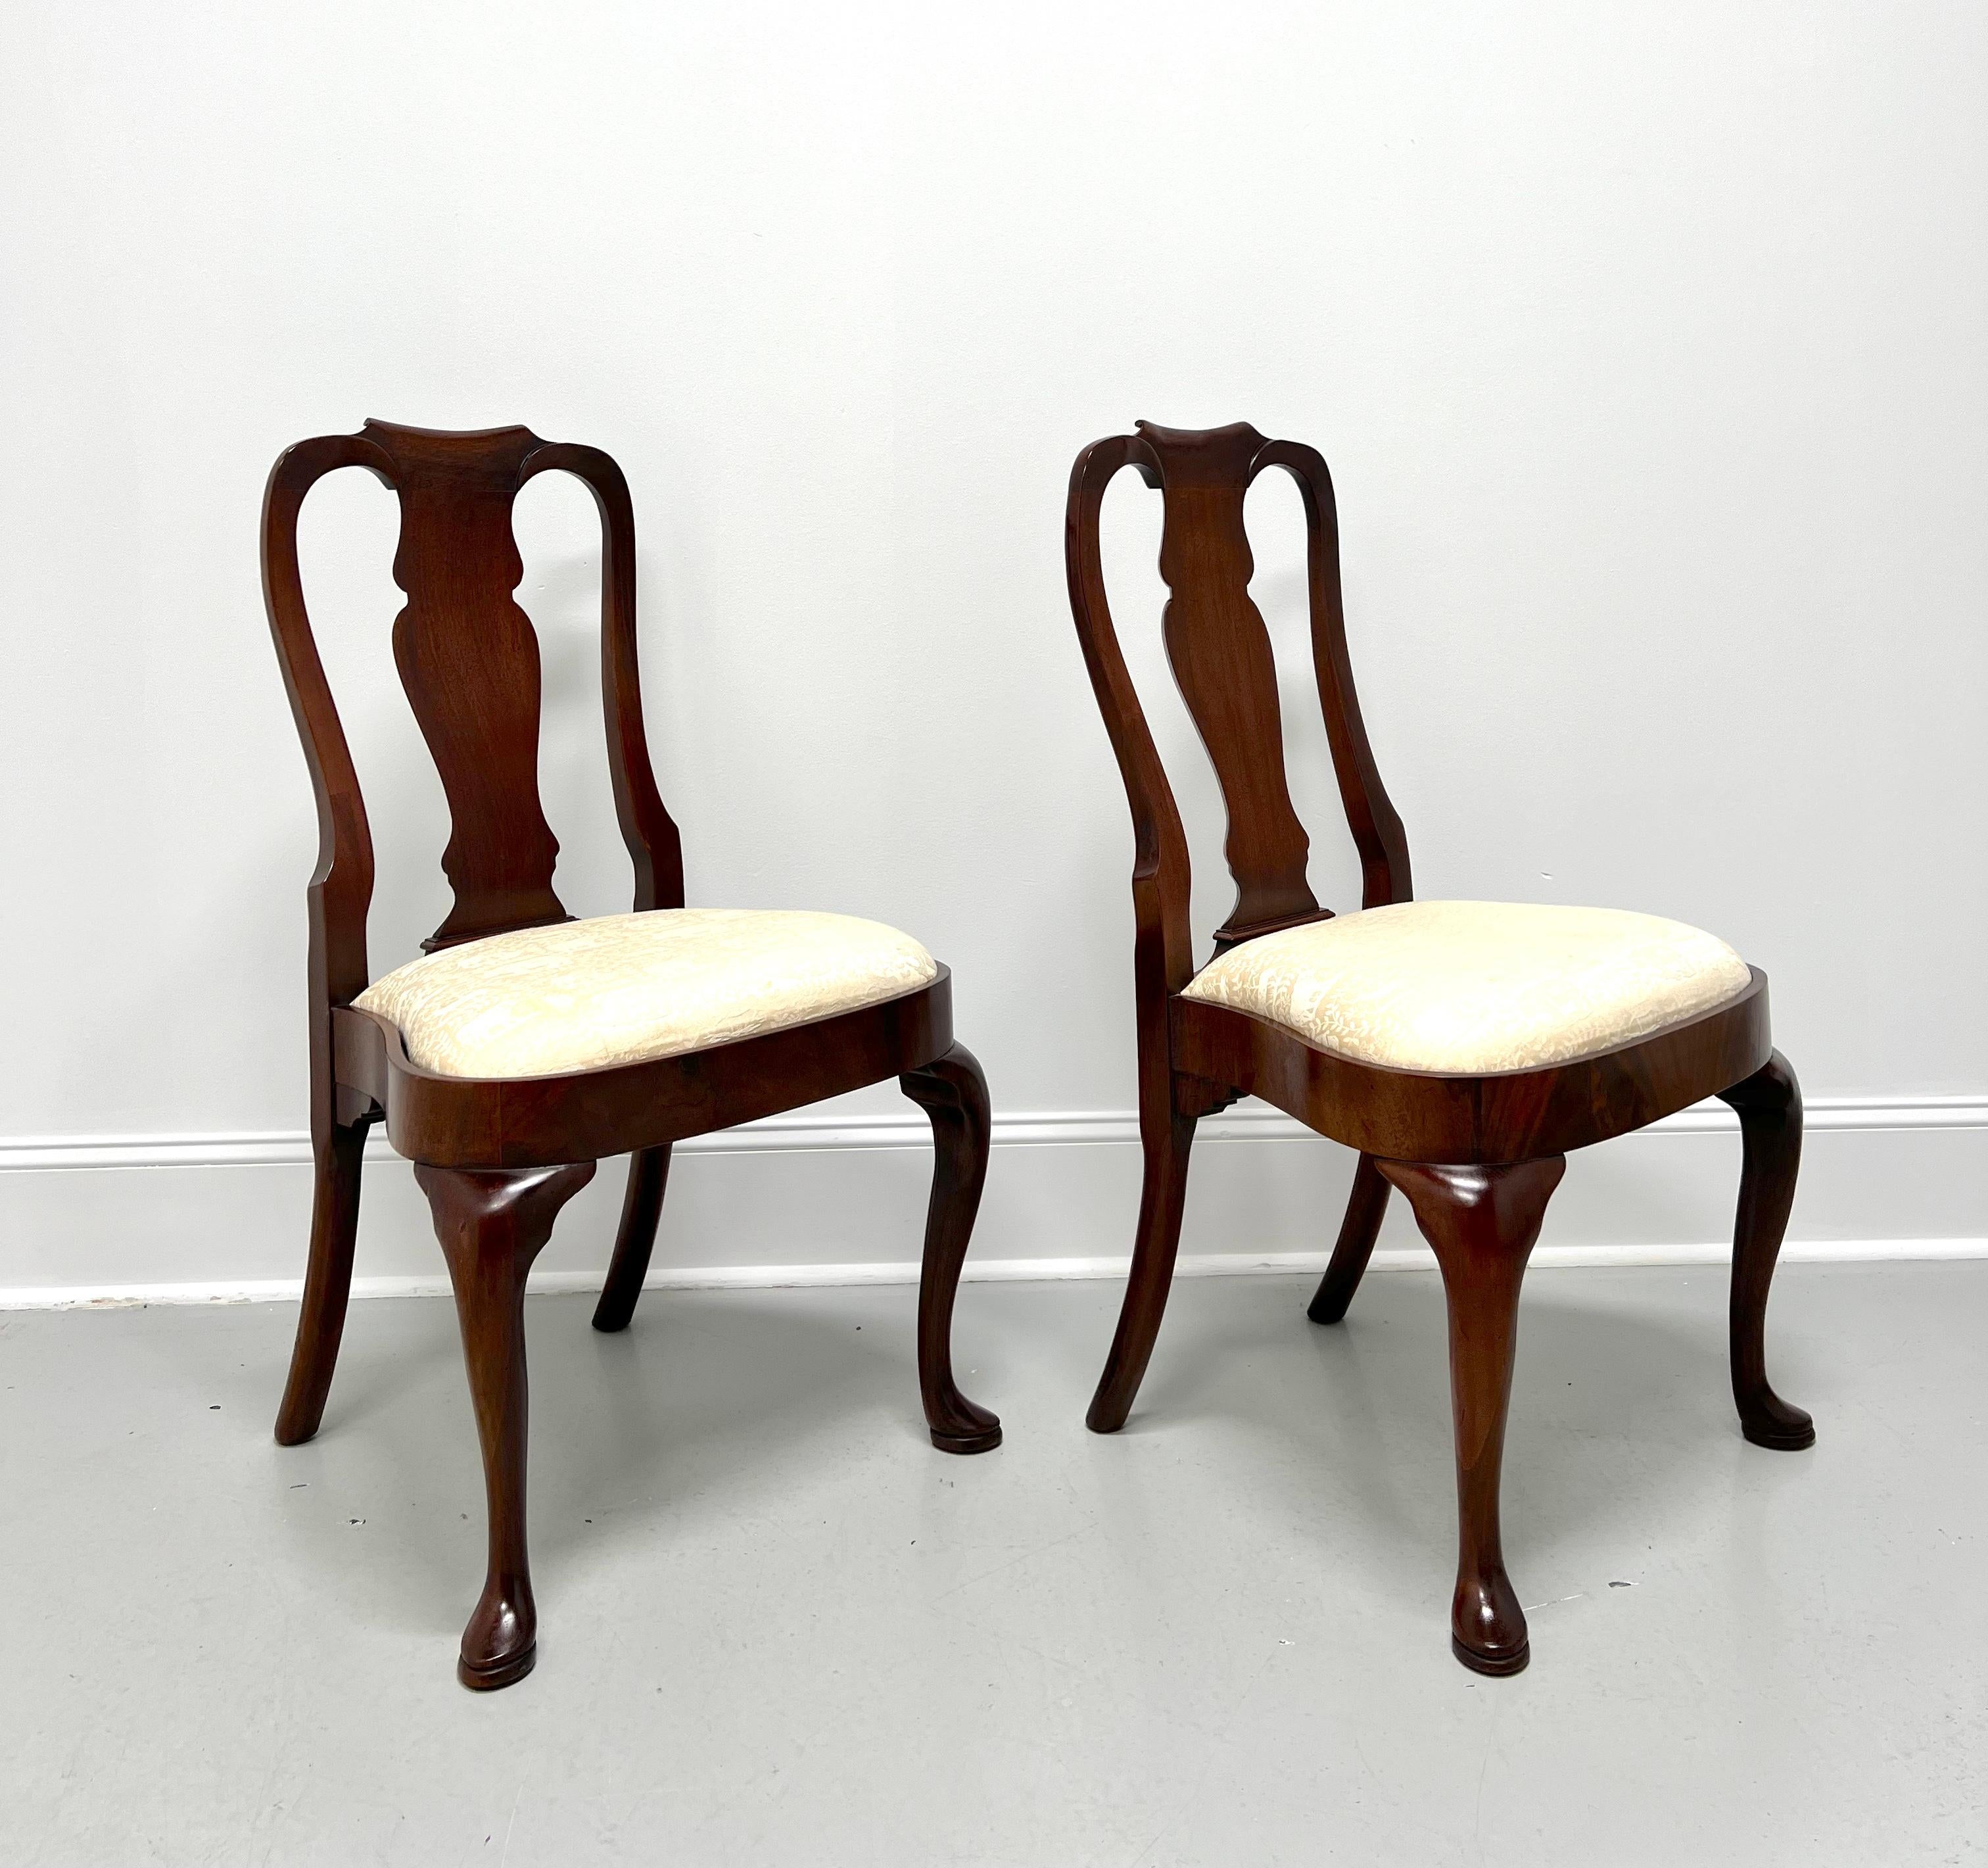 American HICKORY CHAIR Mahogany Queen Anne Dining Side Chairs - Pair For Sale